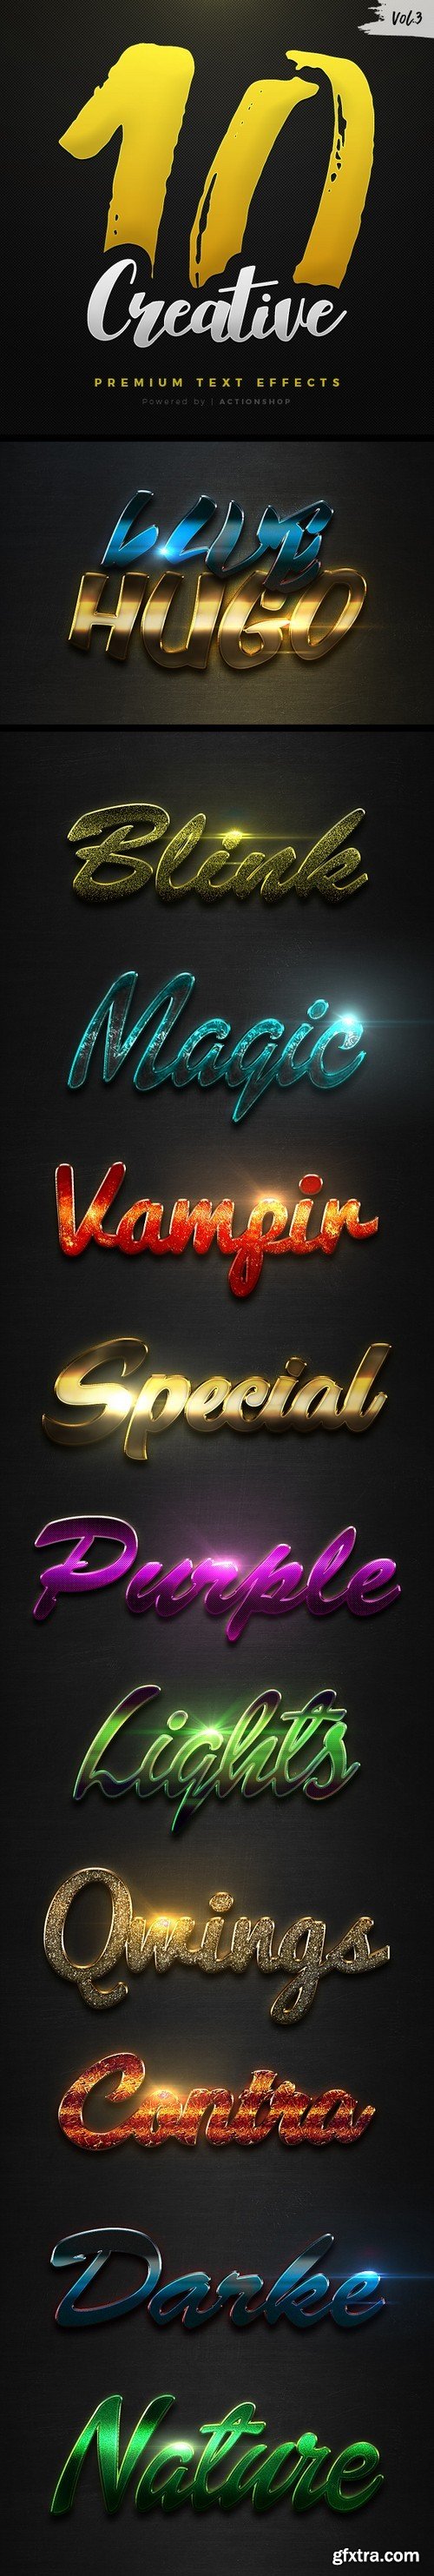 Graphicriver - 10 Creative Text Effects Vol.3 20994151